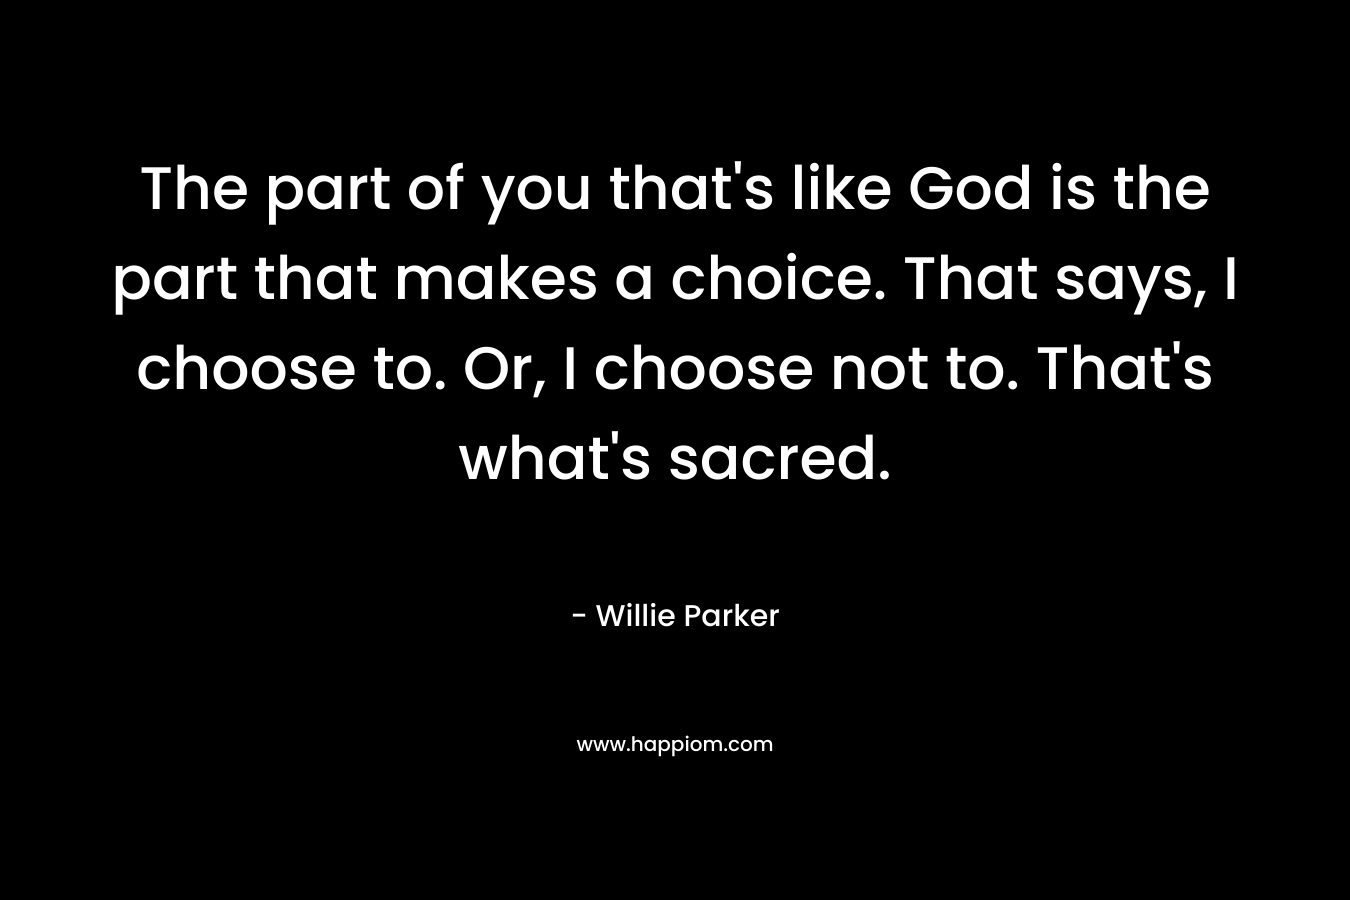 The part of you that’s like God is the part that makes a choice. That says, I choose to. Or, I choose not to. That’s what’s sacred. – Willie Parker